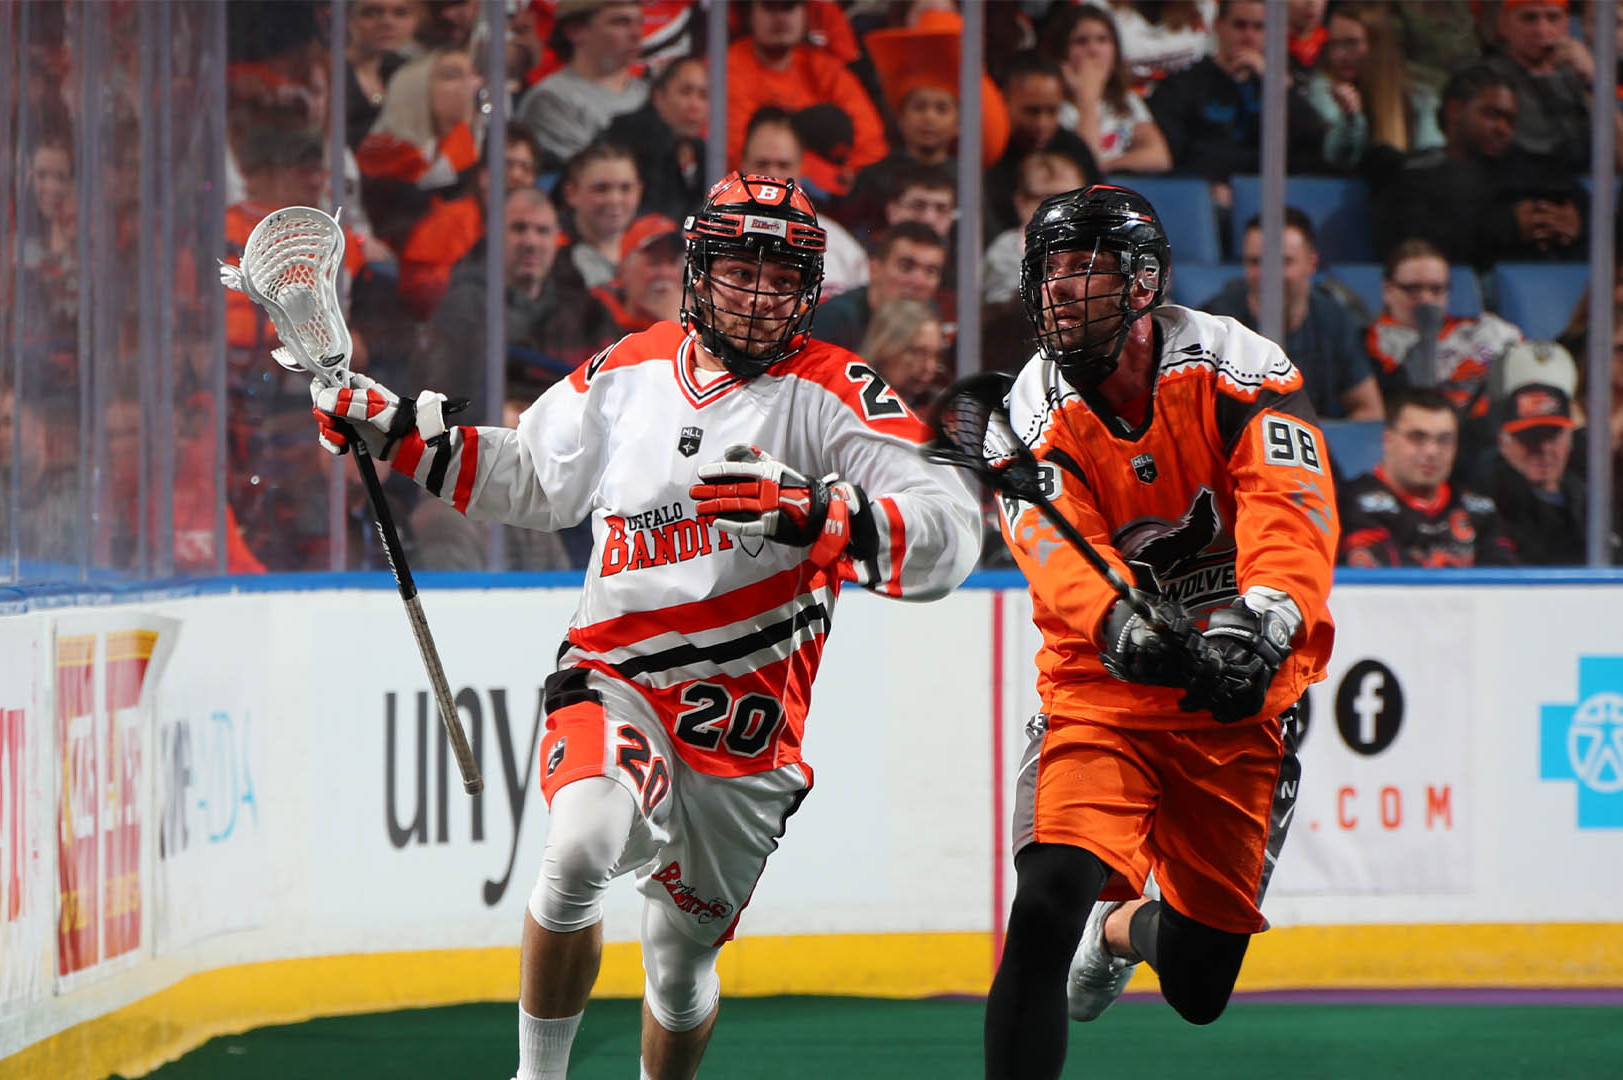 2019 National Lacrosse League Finals: How to Watch, Schedule and